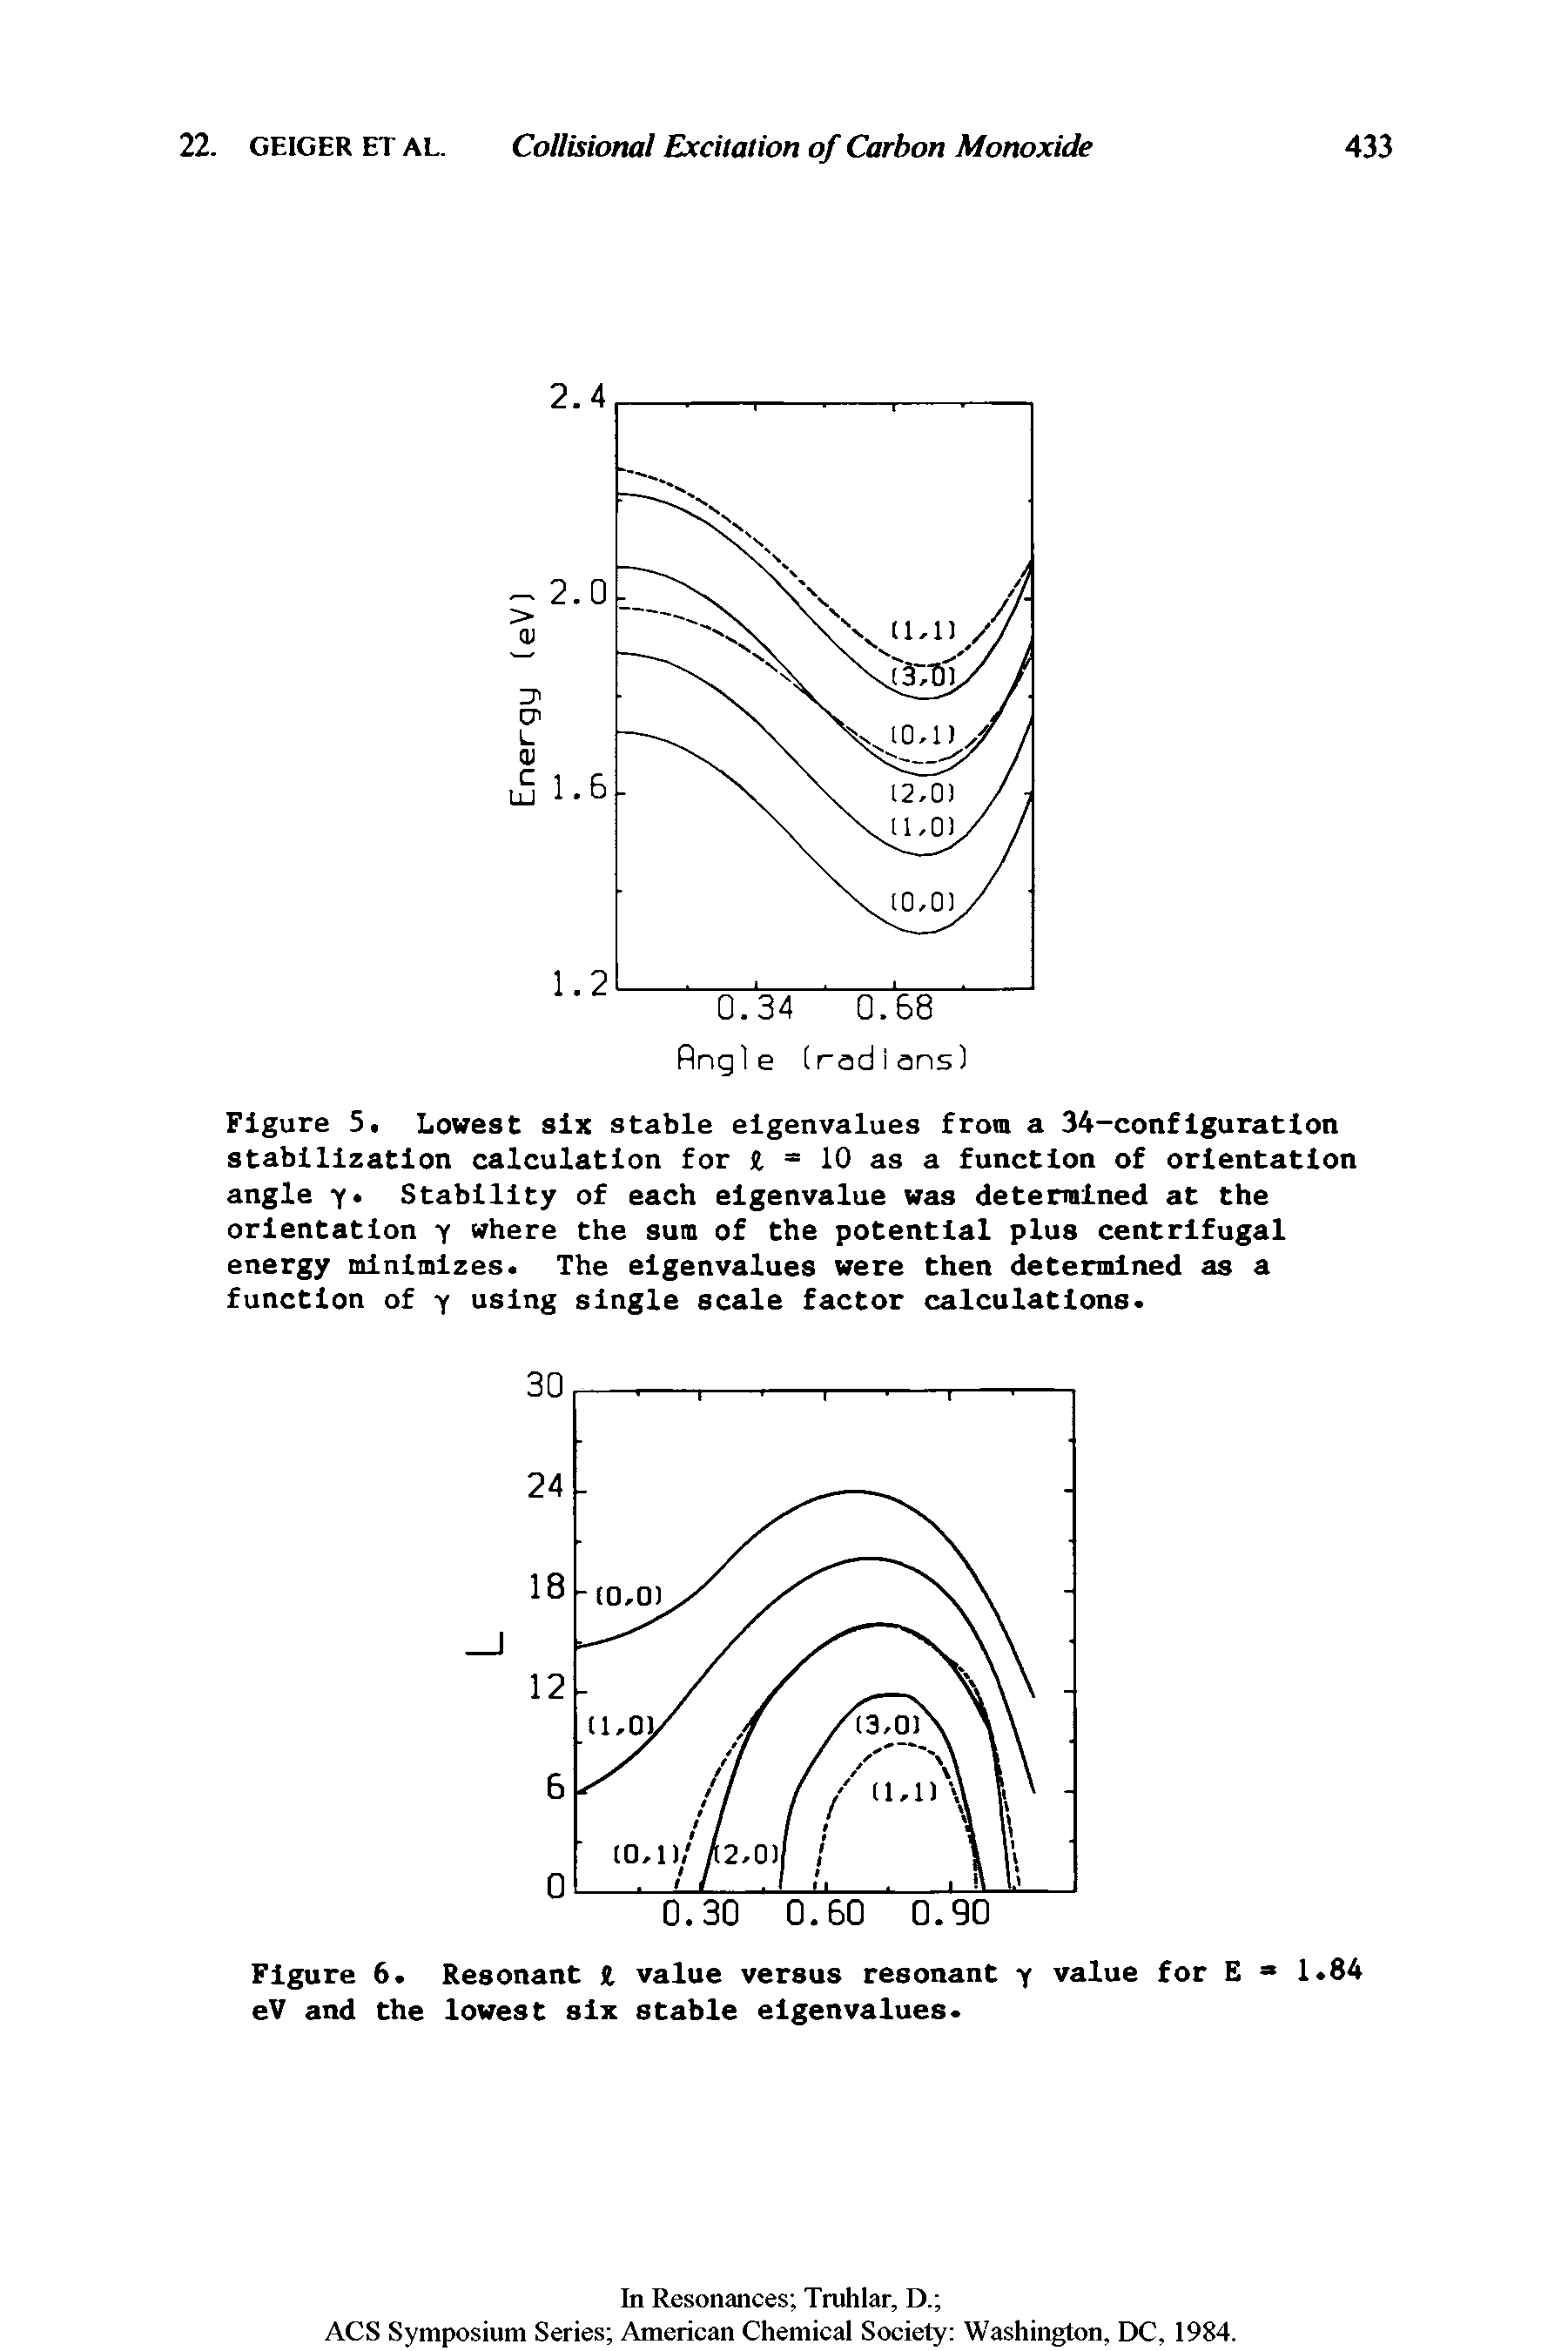 Figure 5. Lowest six stable eigenvalues from a 34-configuration stabilization calculation for i == 10 as a function of orientation angle Stability of each eigenvalue was determined at the orientation y where the sum of the potential plus centrifugal energy minimizes. The eigenvalues were then determined as a function of y using single scale factor calculations.